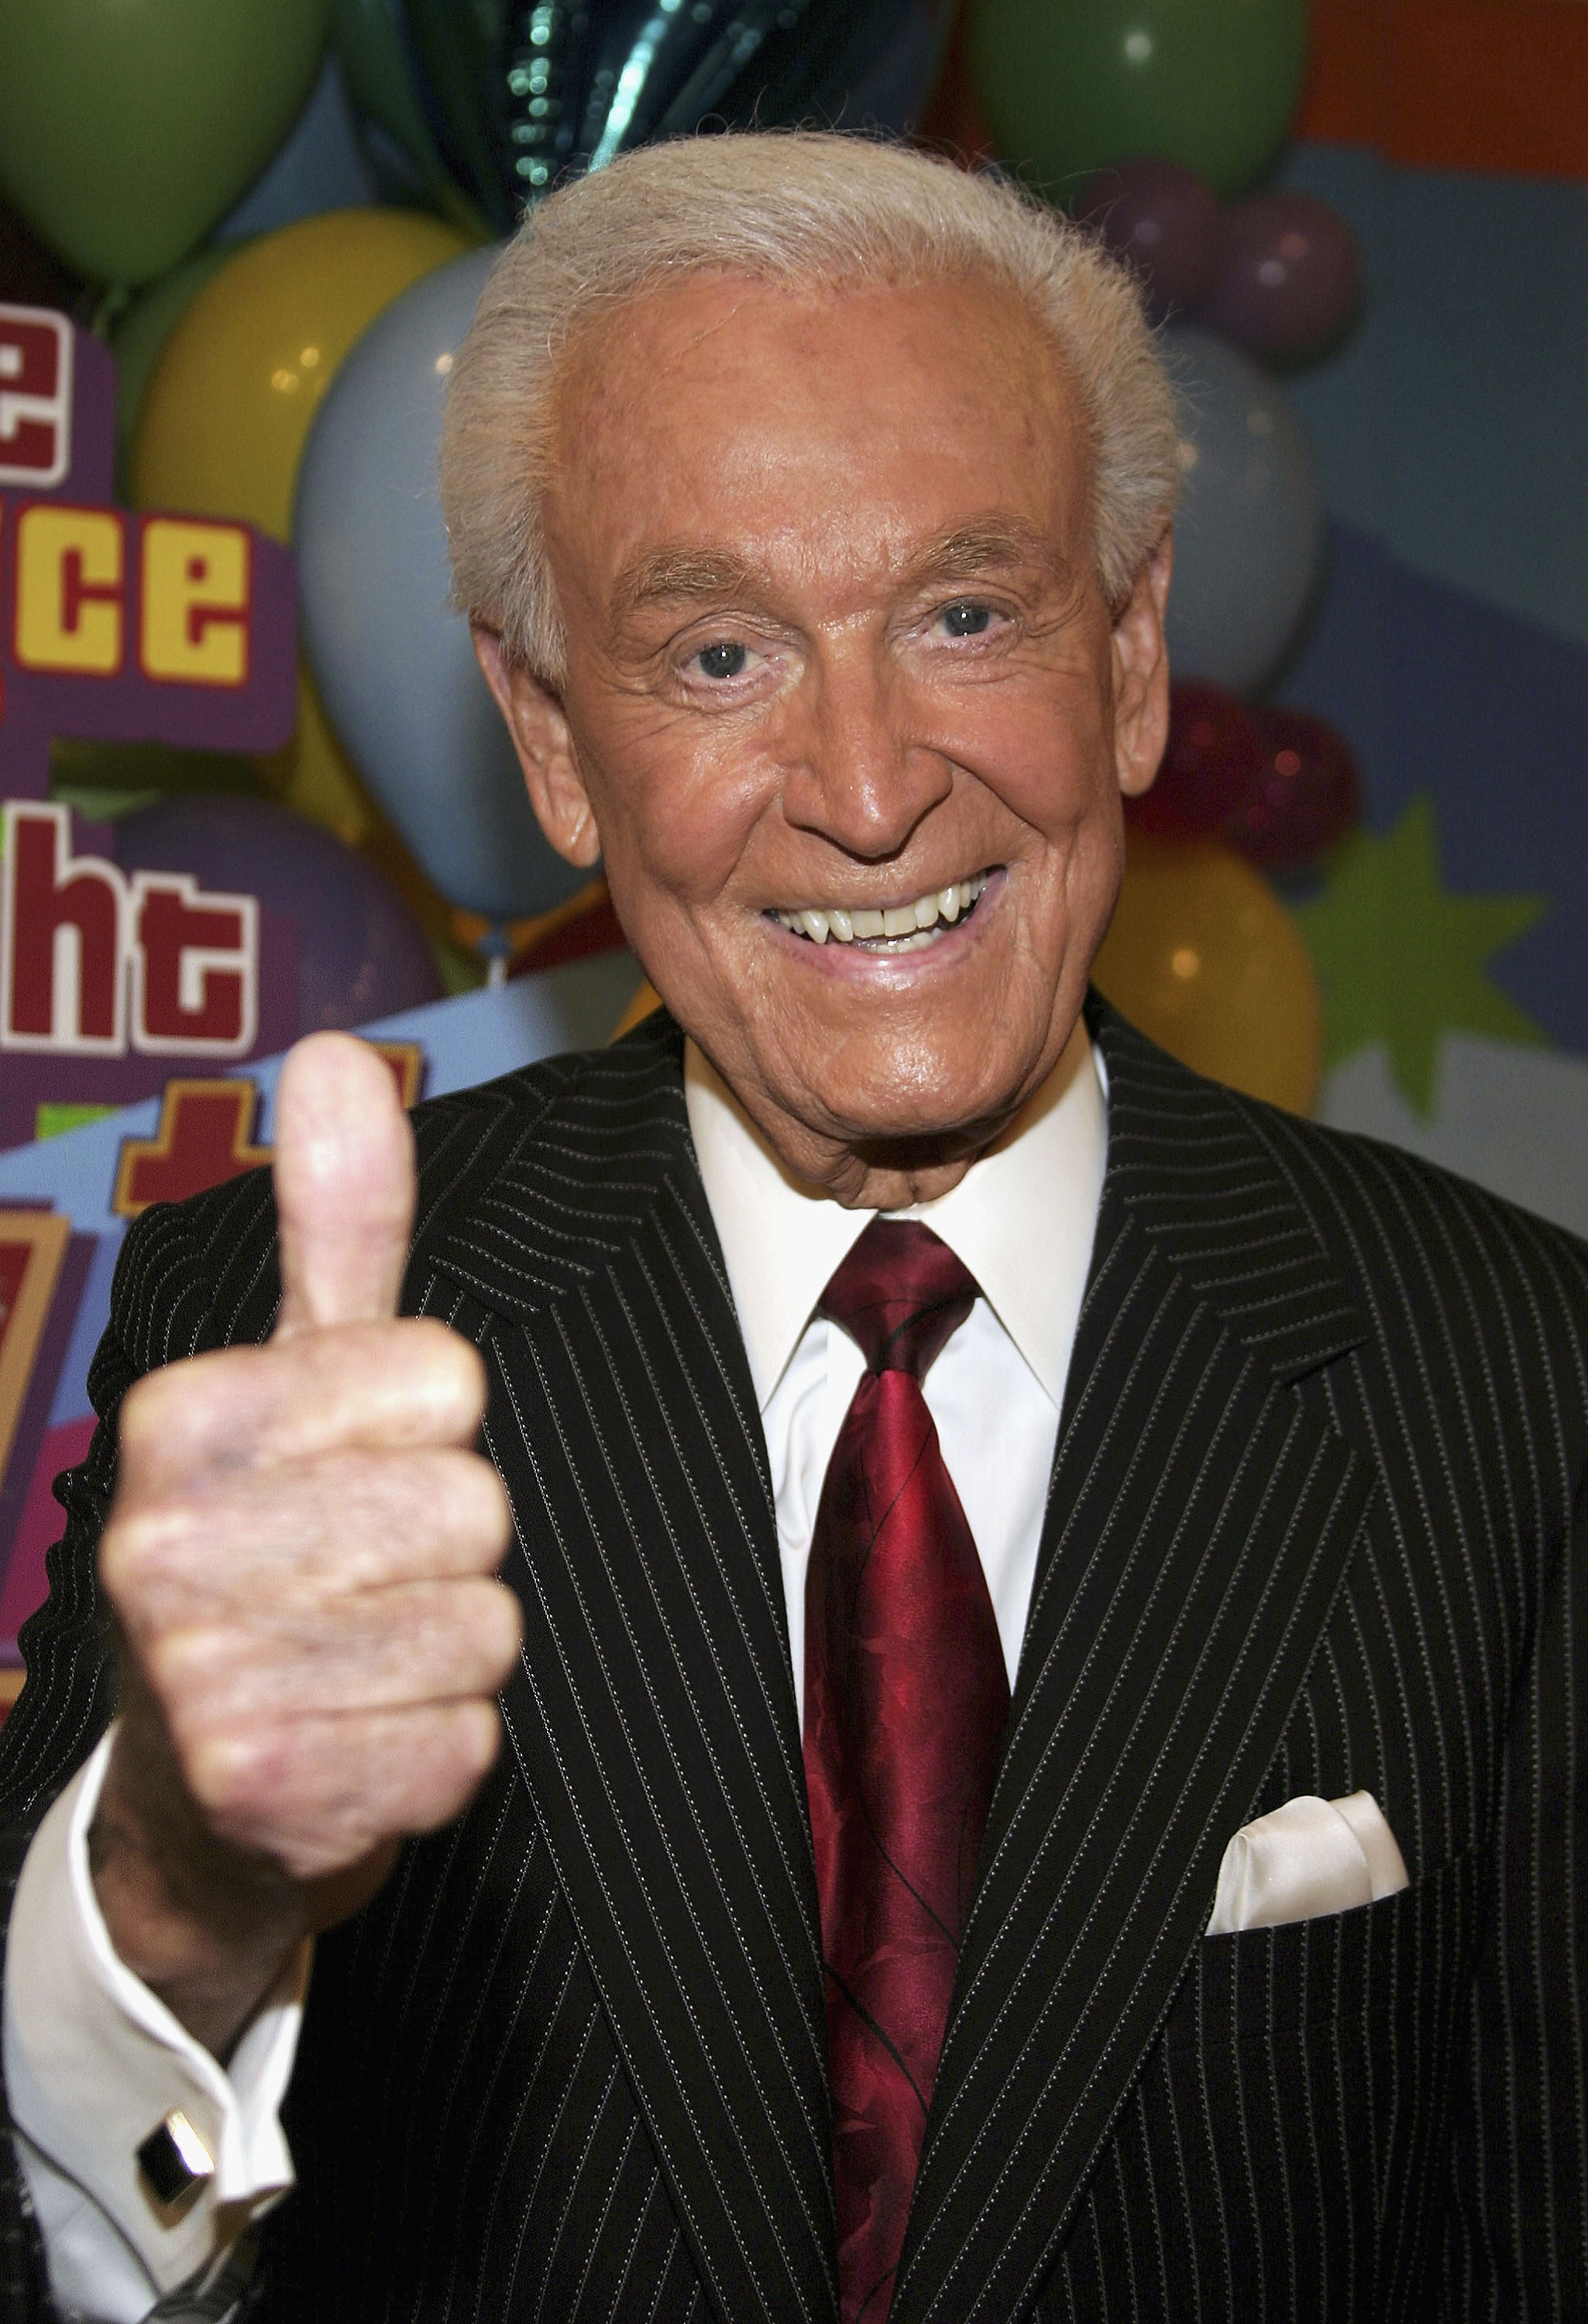 Bob Barker during the premiere of the 34th season of "The Price Is Right" in Los Angeles, 2005 | Source: Getty Images